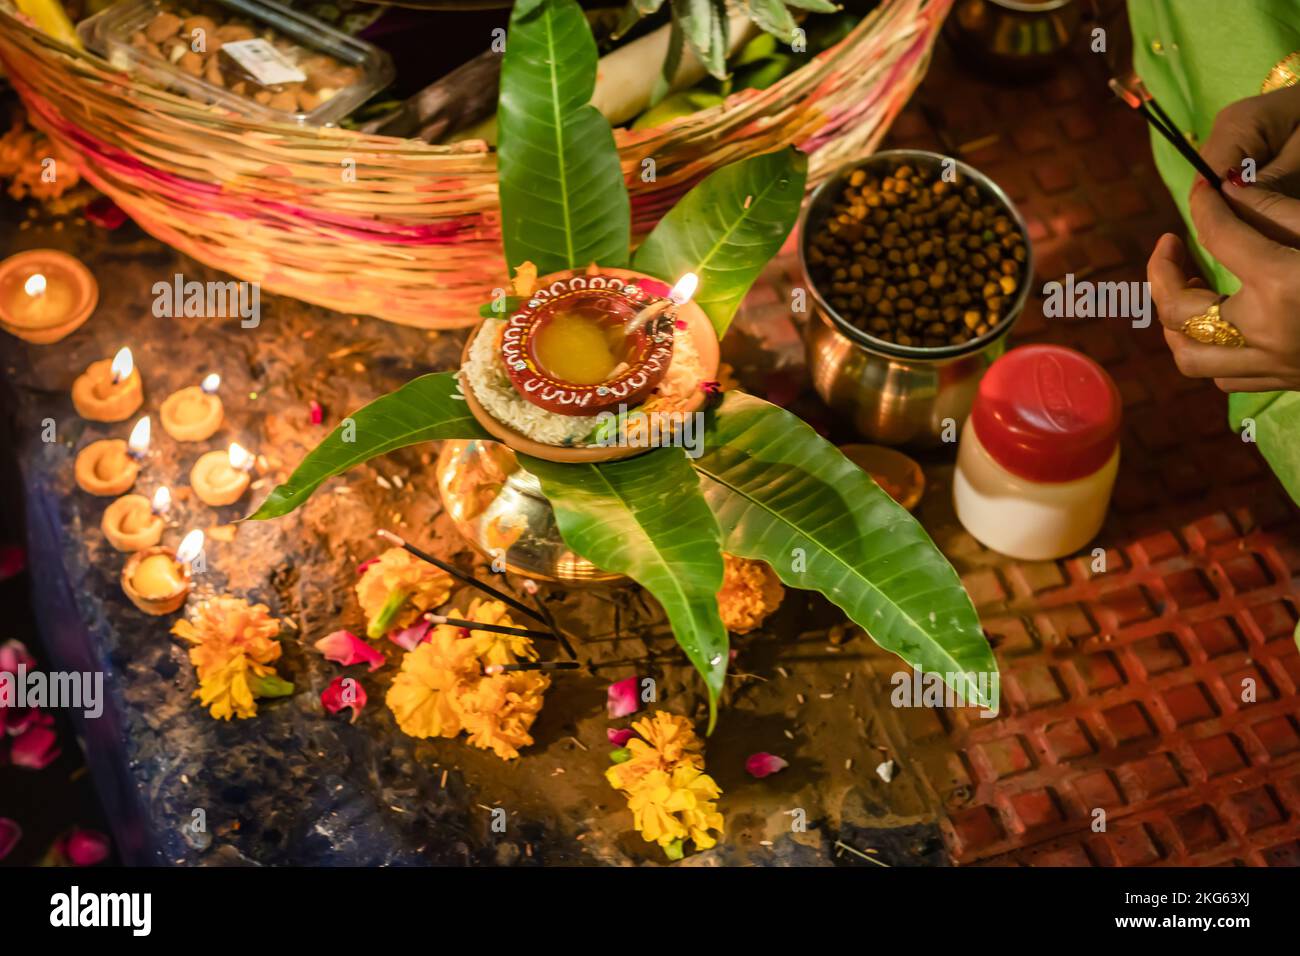 Hindu religious offerings for sun god during Chhath festival from different angle Stock Photo